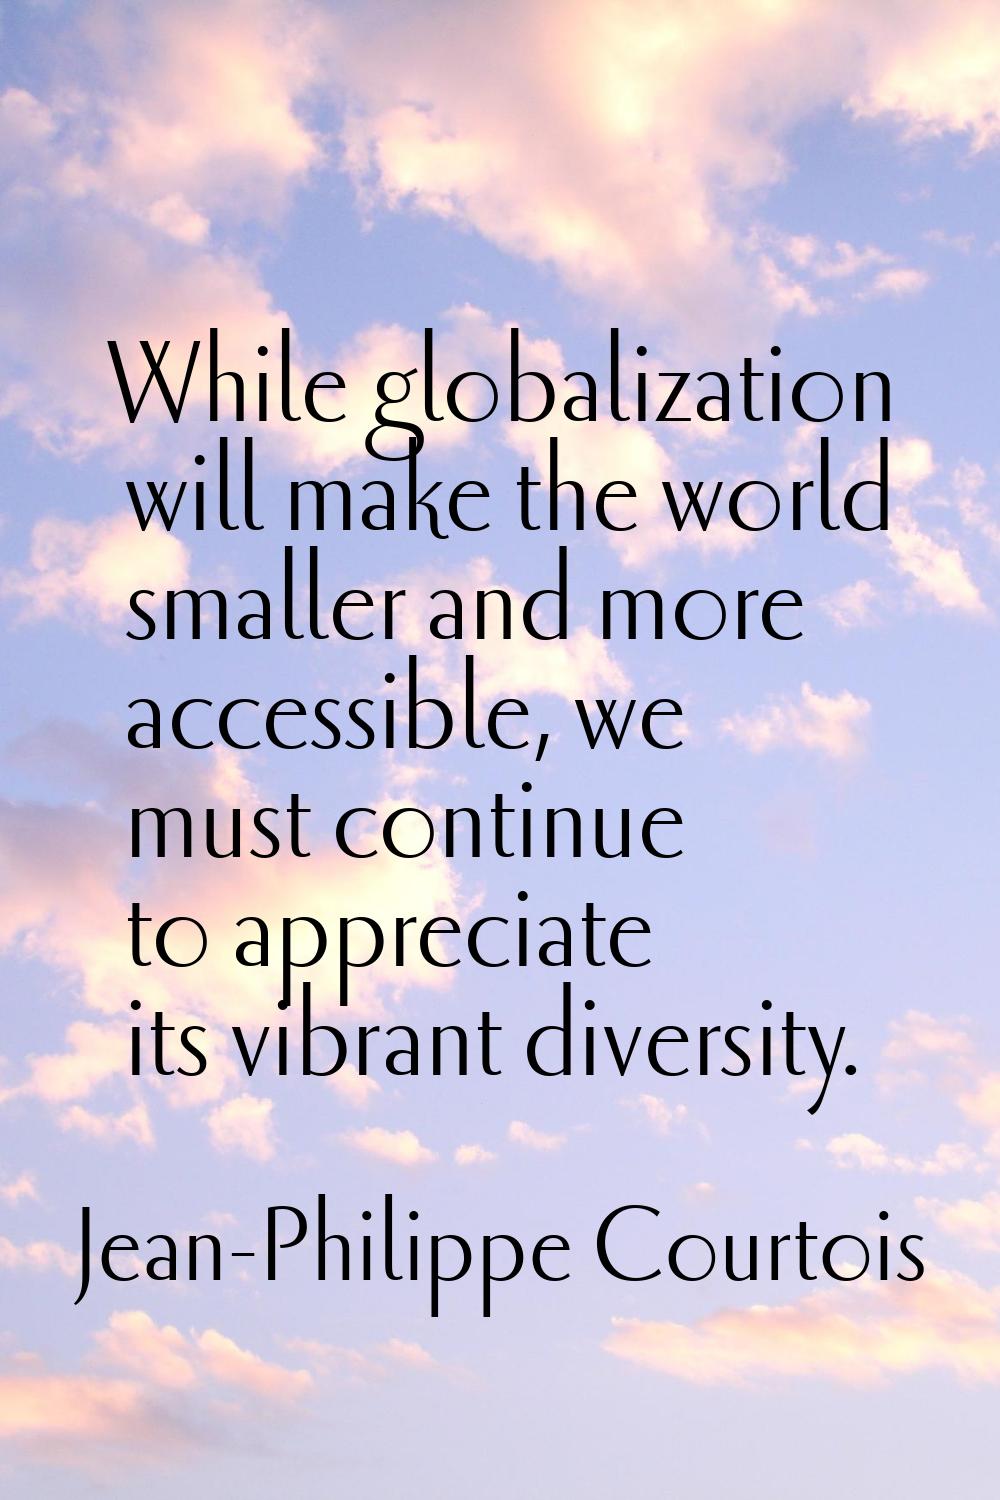 While globalization will make the world smaller and more accessible, we must continue to appreciate